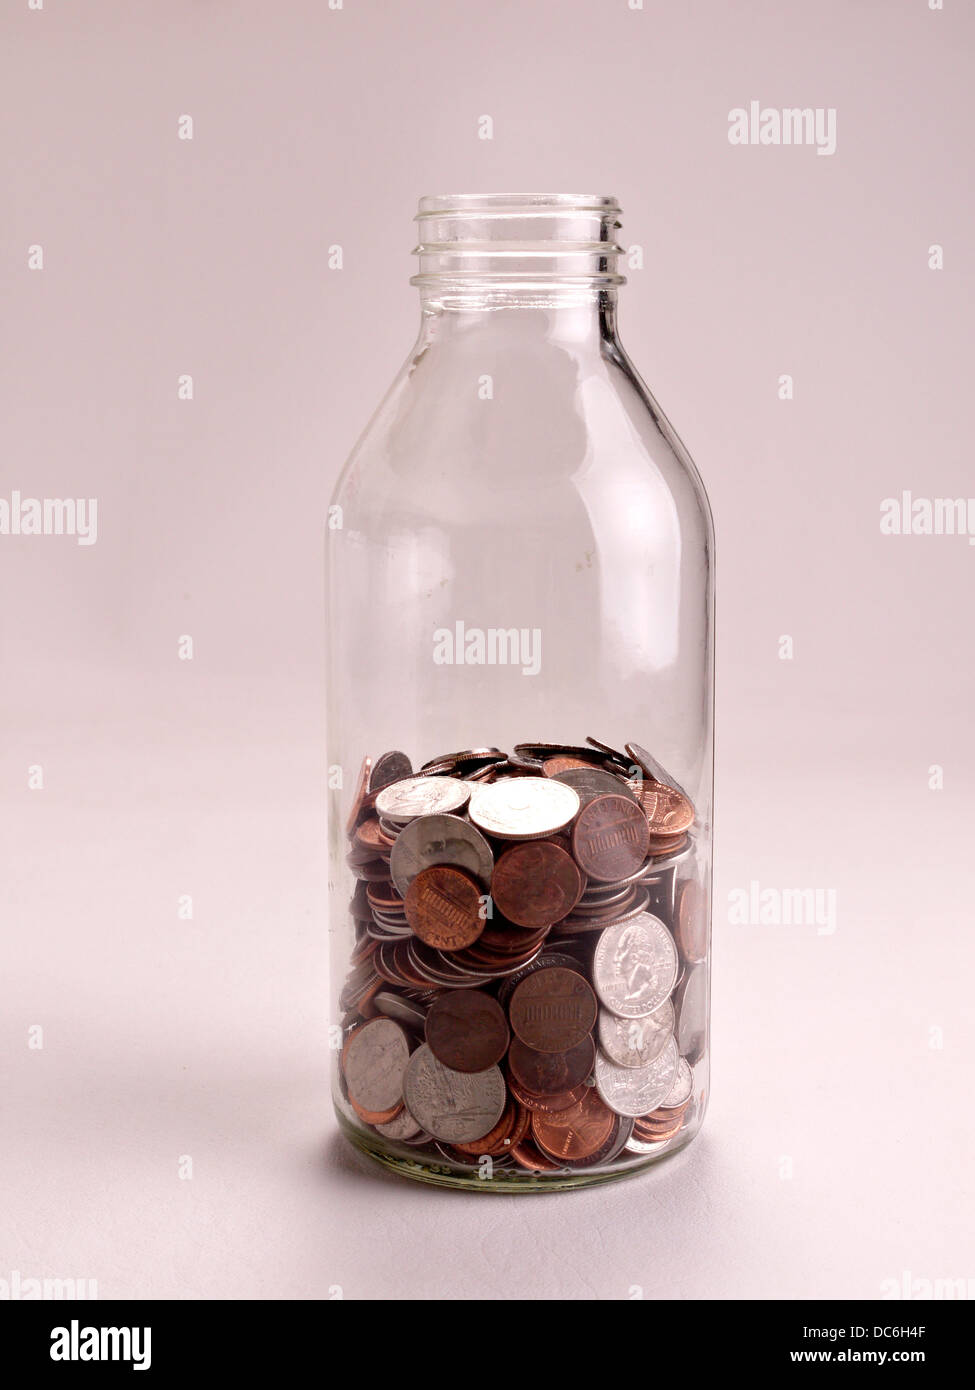 A half full jar of American coins sits on a white background. Stock Photo